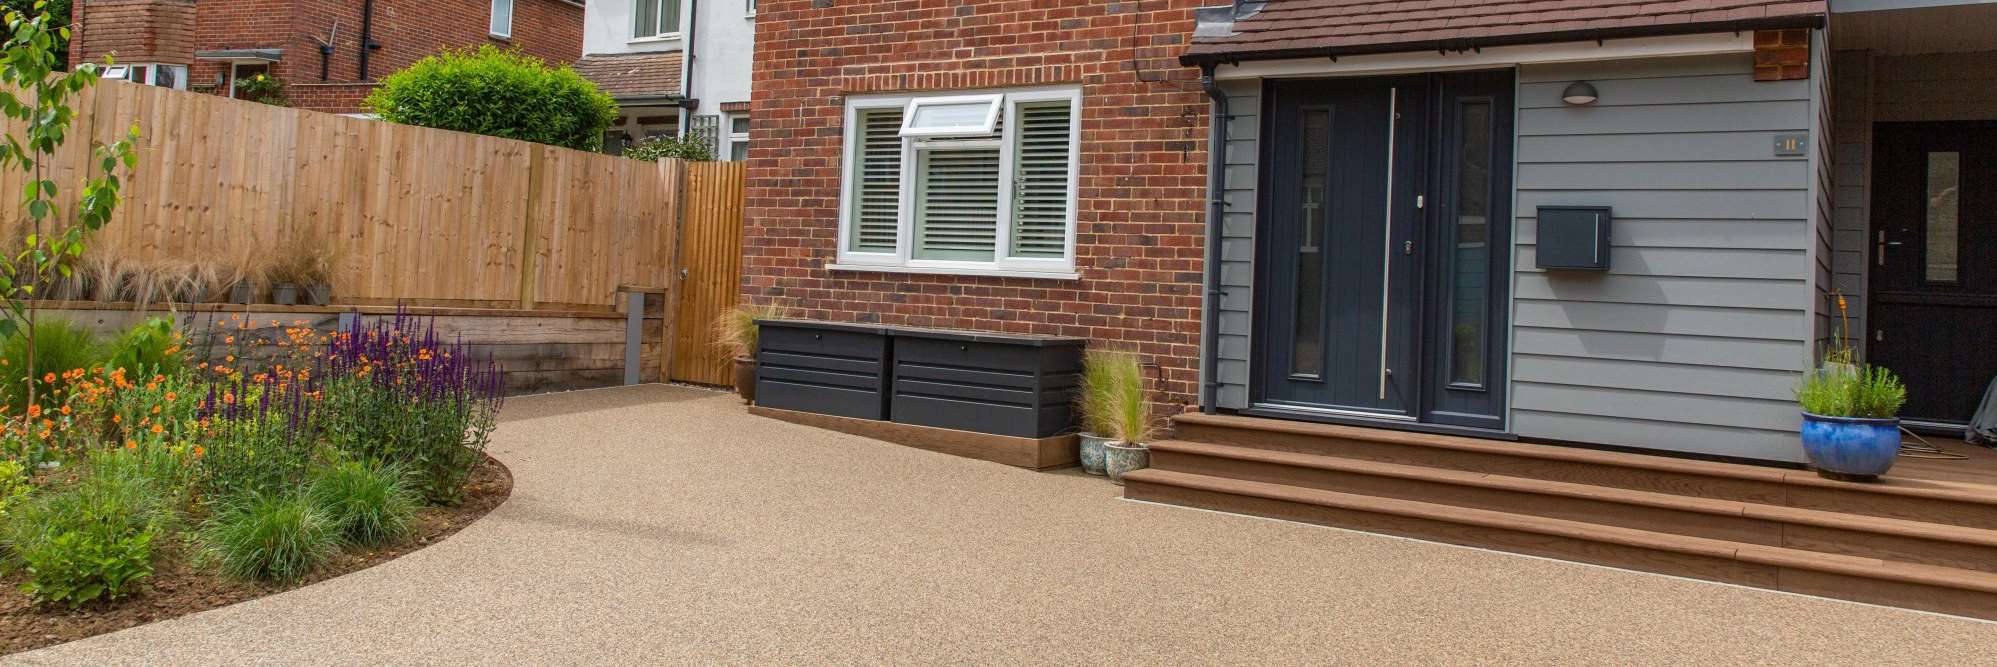 shingle driveway installers surrey and west sussex image